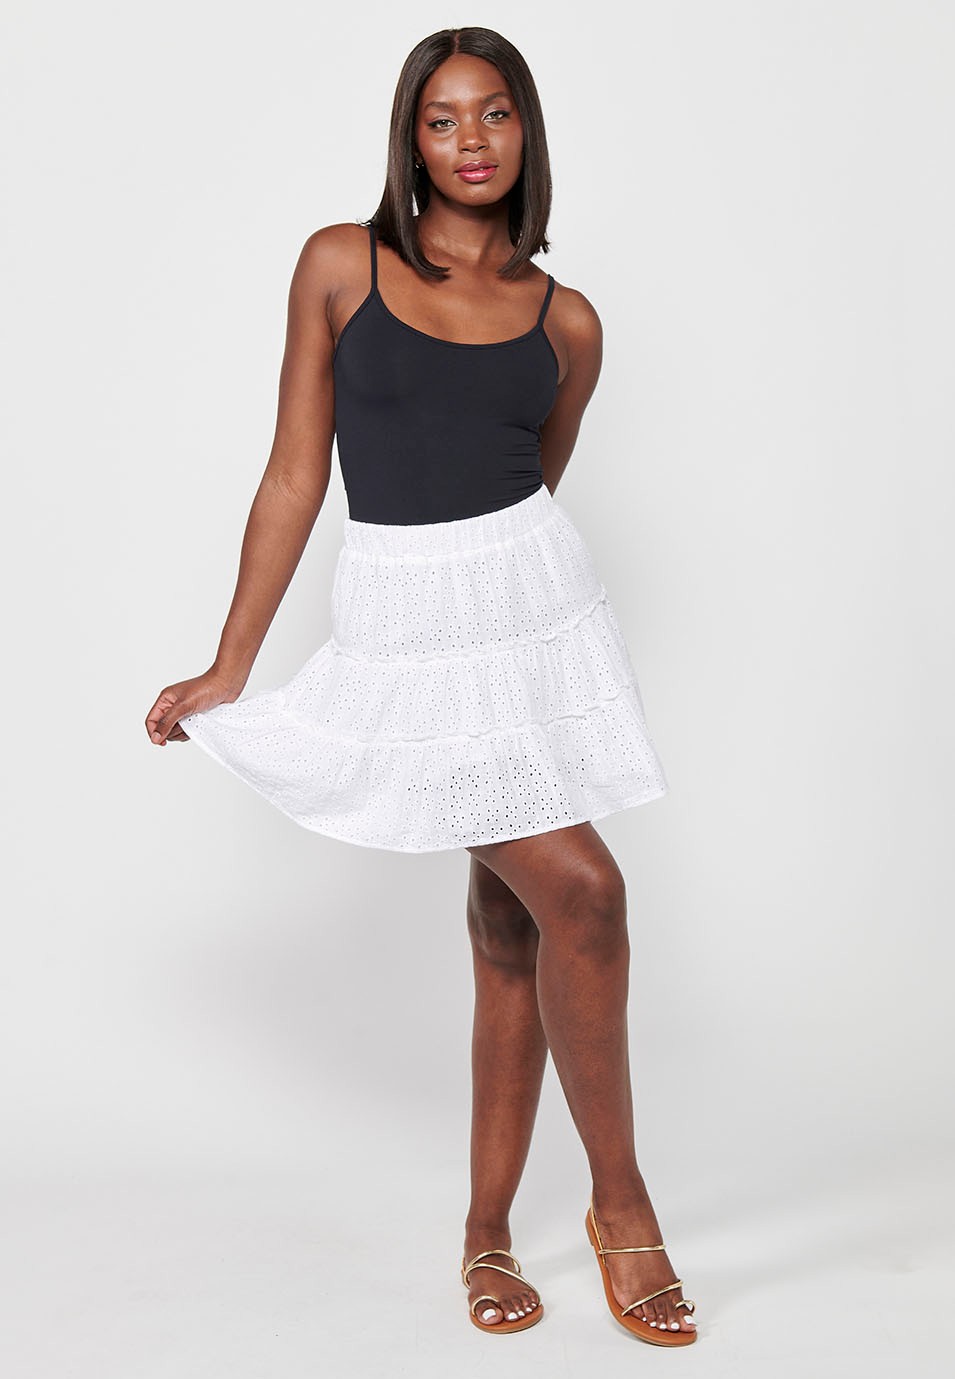 Short cotton skirt, with ruffle and embroidery, fitted at the waist with elastic band, white color for women